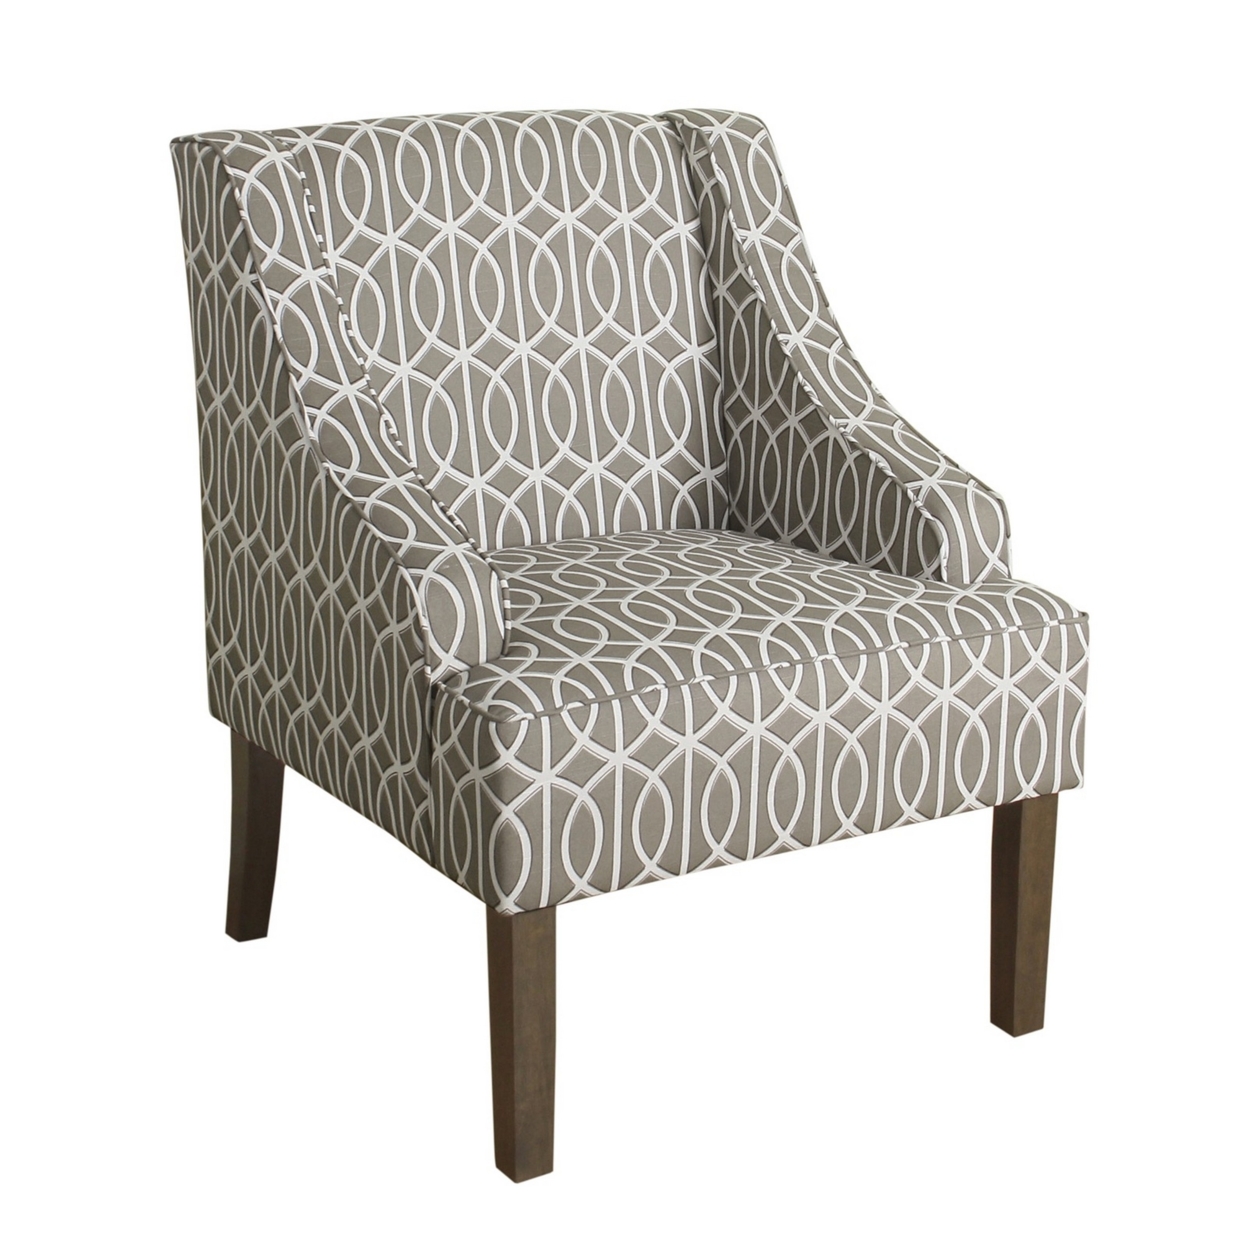 Fabric Upholstered Wooden Accent Chair With Trellis Pattern Design, Gray, White And Brown- Saltoro Sherpi